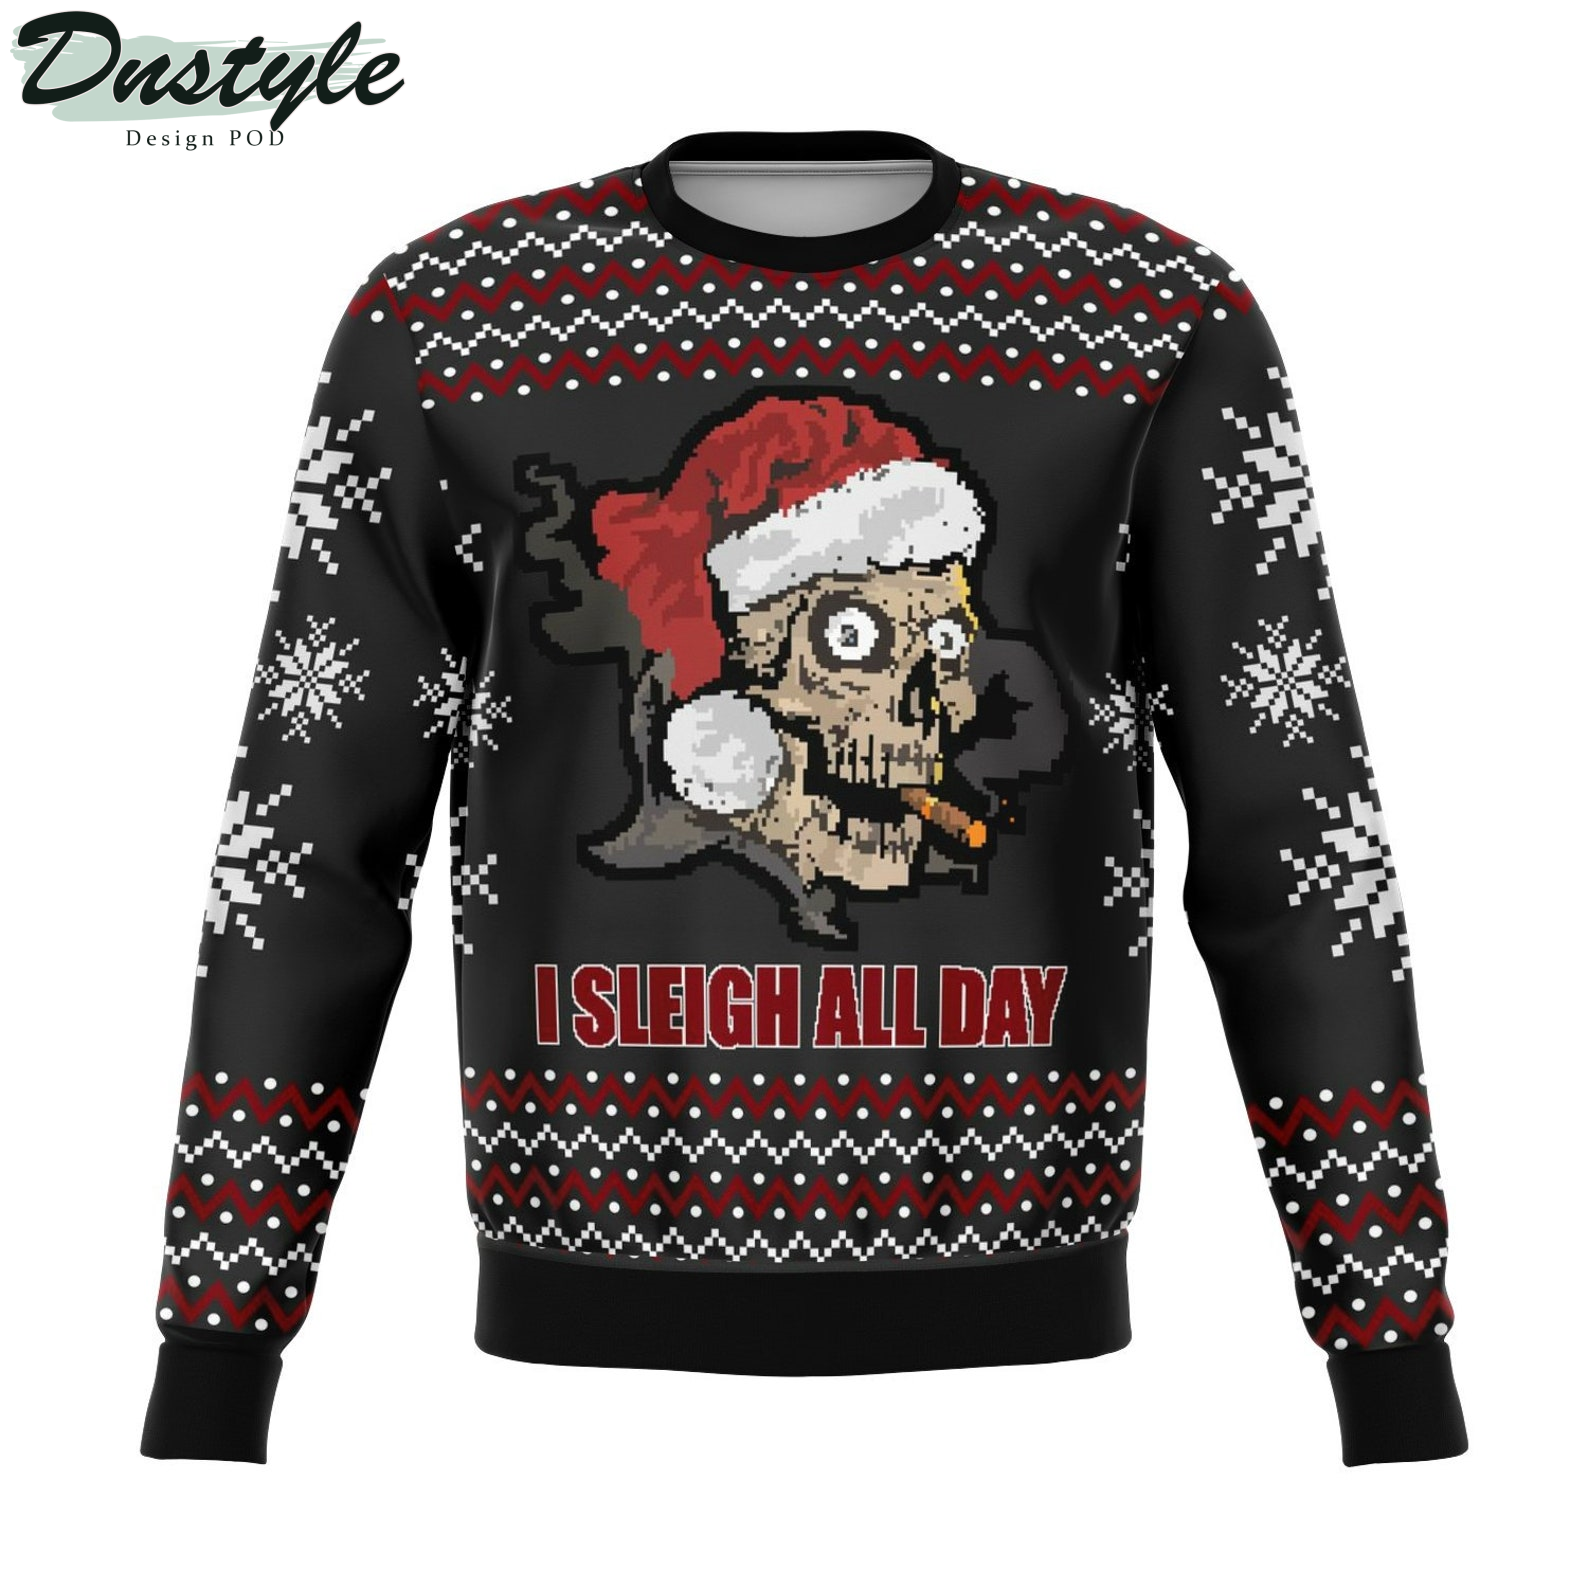 Sleigh All Day 2022 Ugly Christmas Sweater